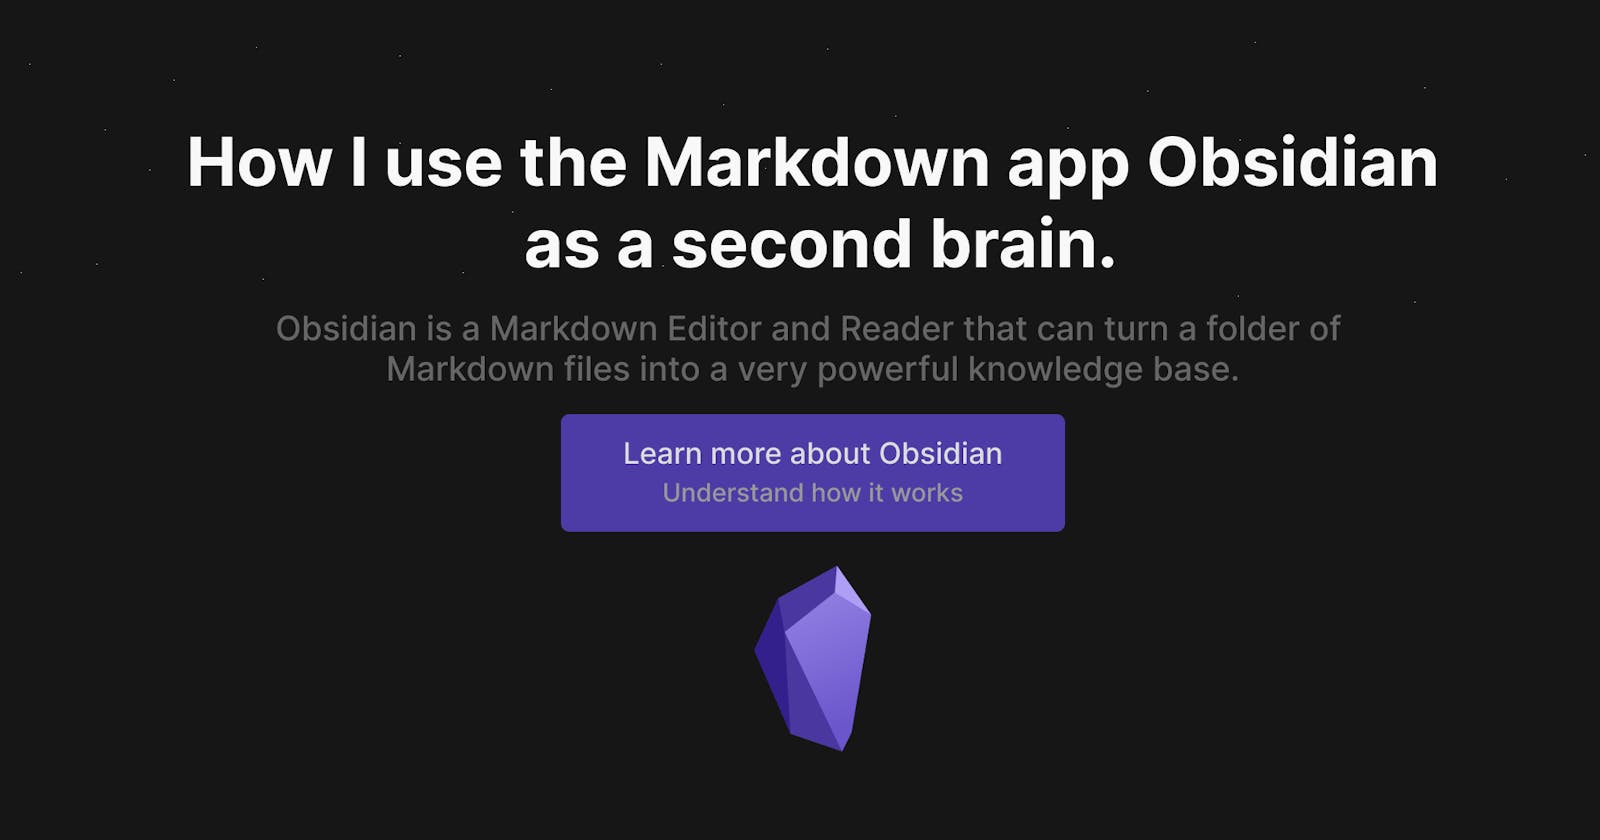 How I use the Markdown app Obsidian as a second brain